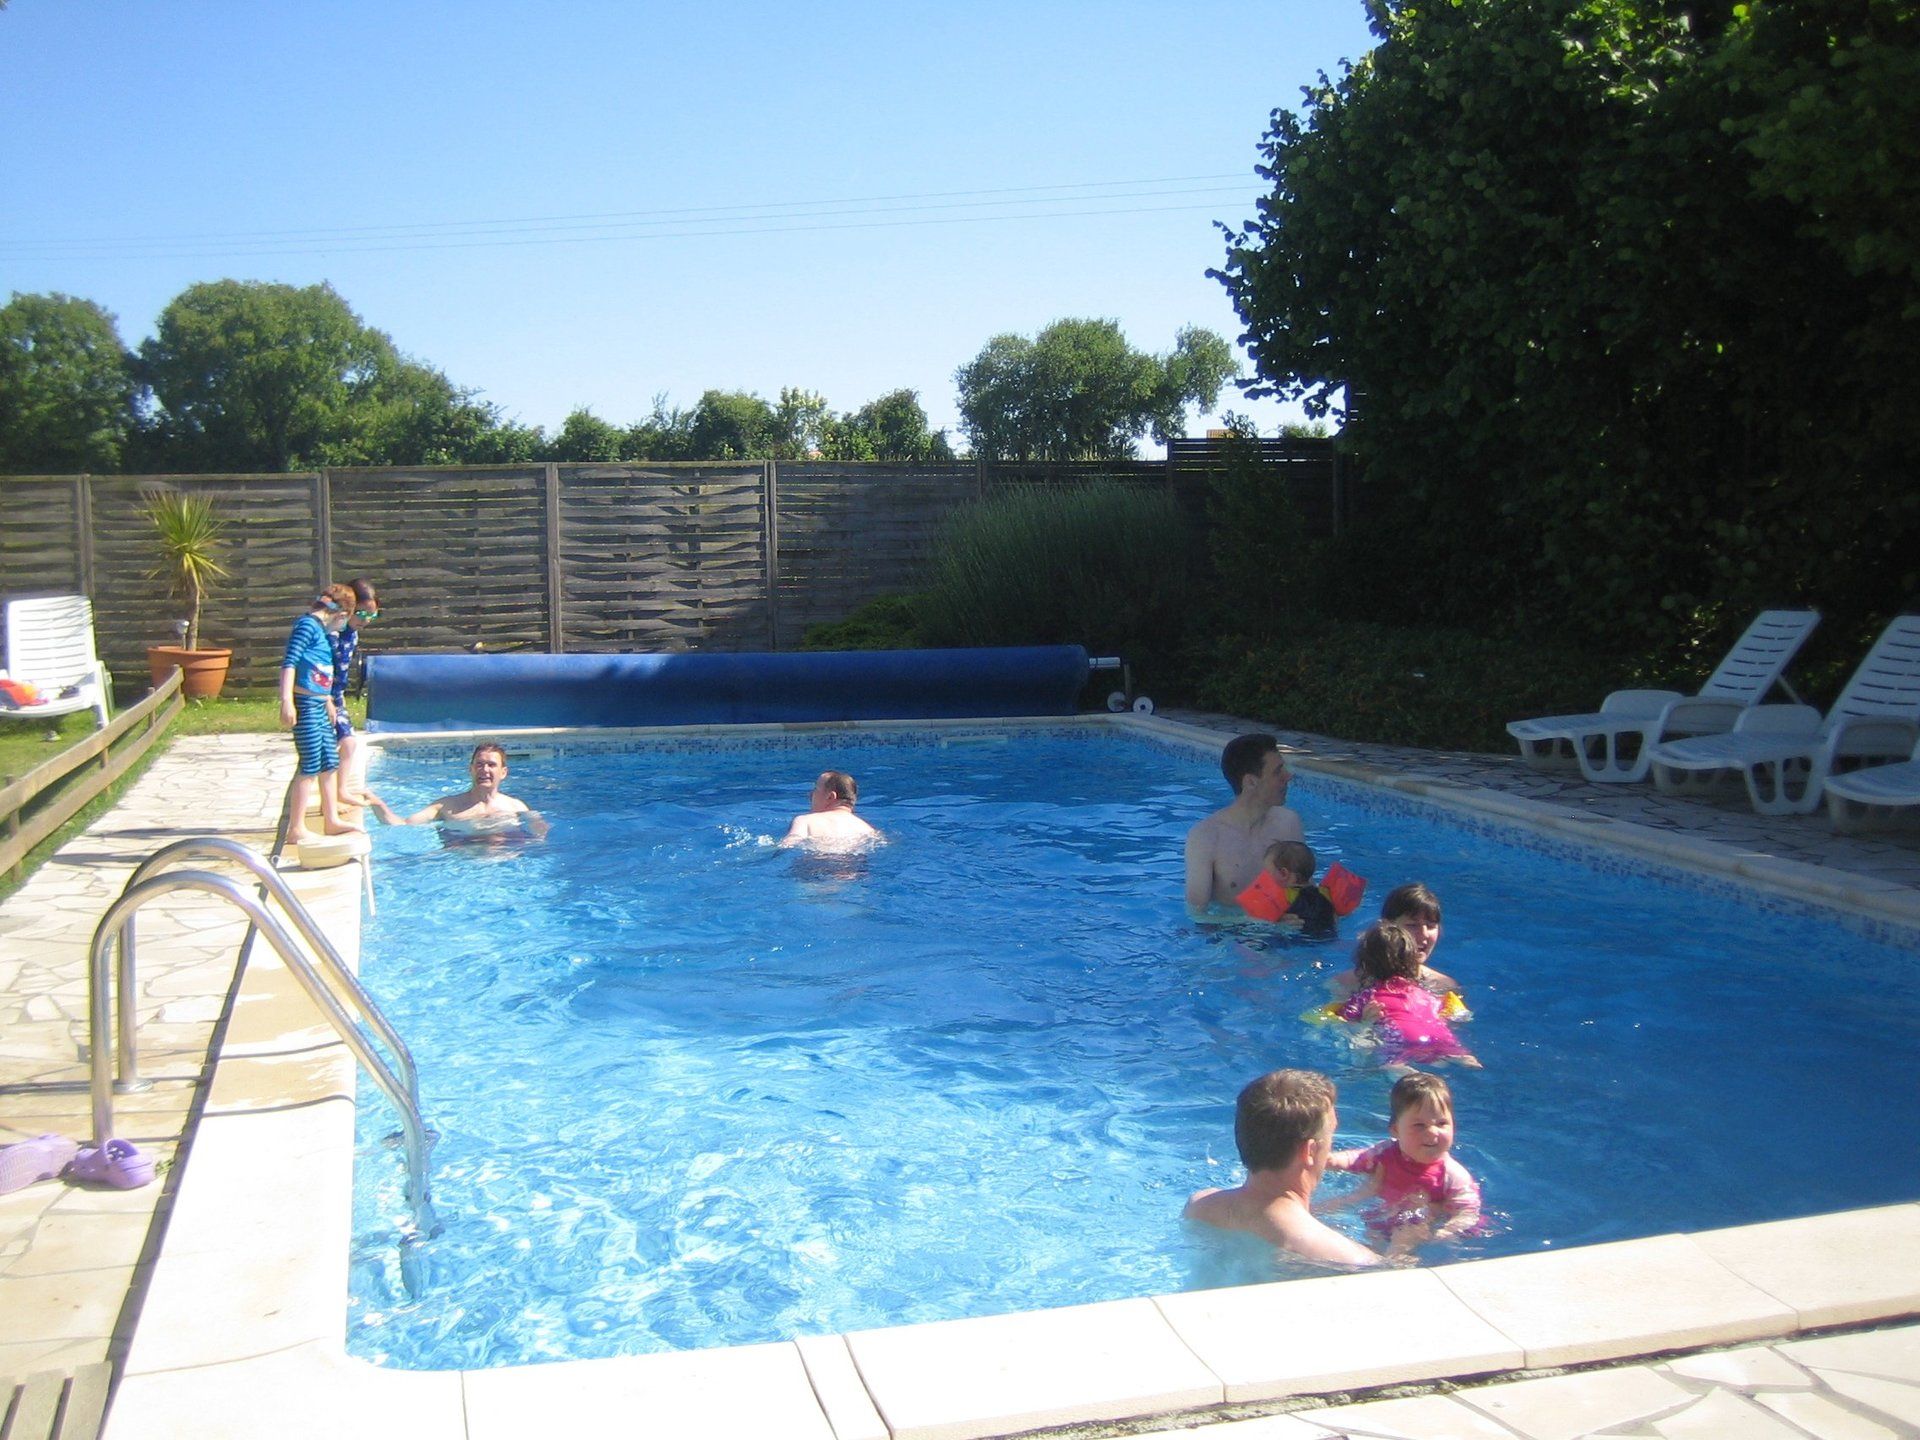 children playing in a swimming pool in France